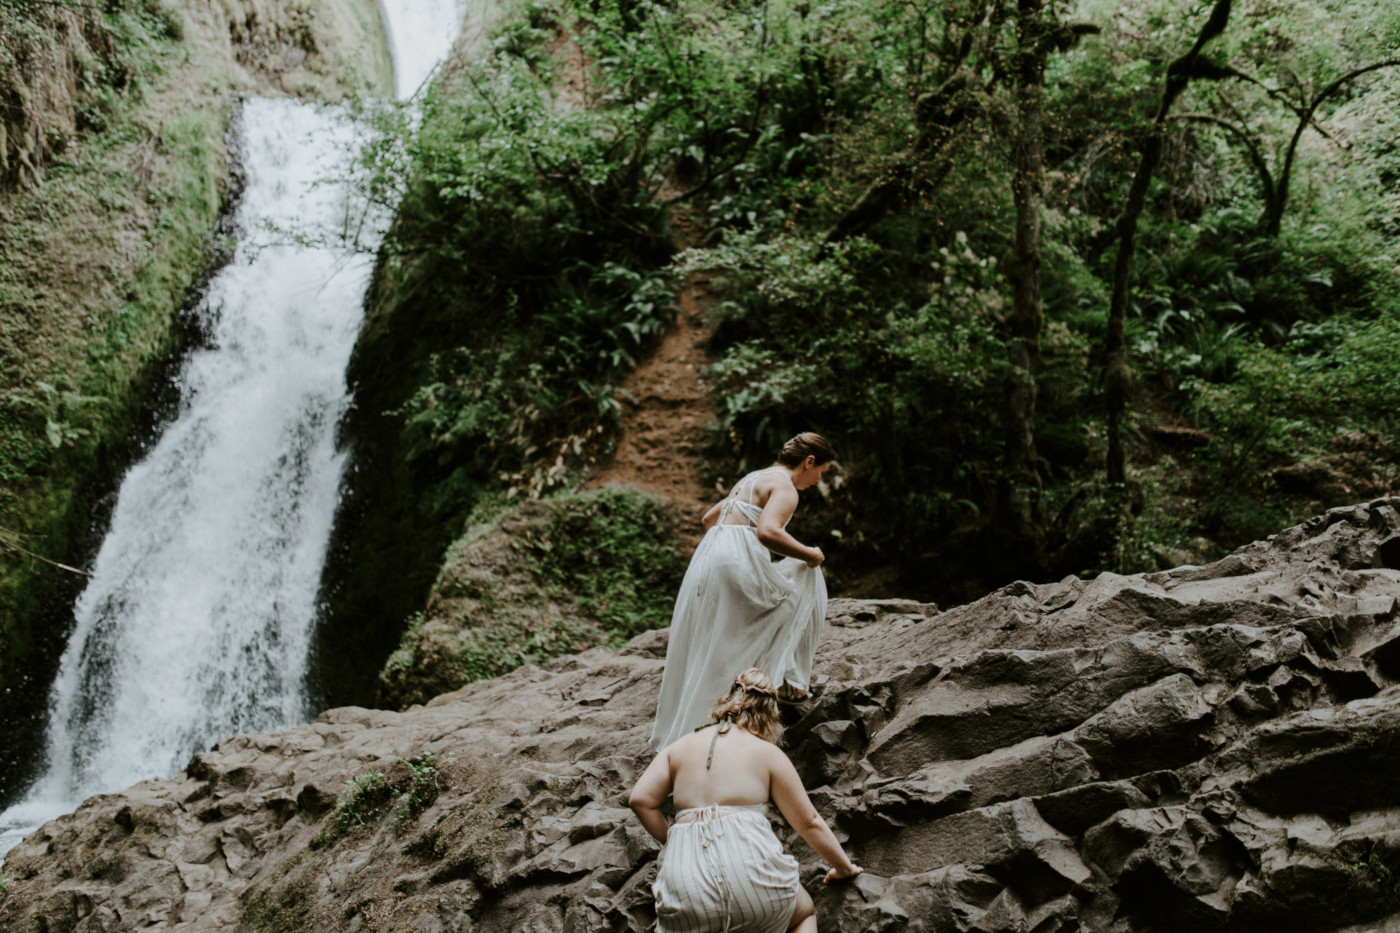 Kate and Audrey climb up a large boulder in front of Bridal Veil Falls. Elopement wedding photography at Bridal Veil Falls by Sienna Plus Josh.